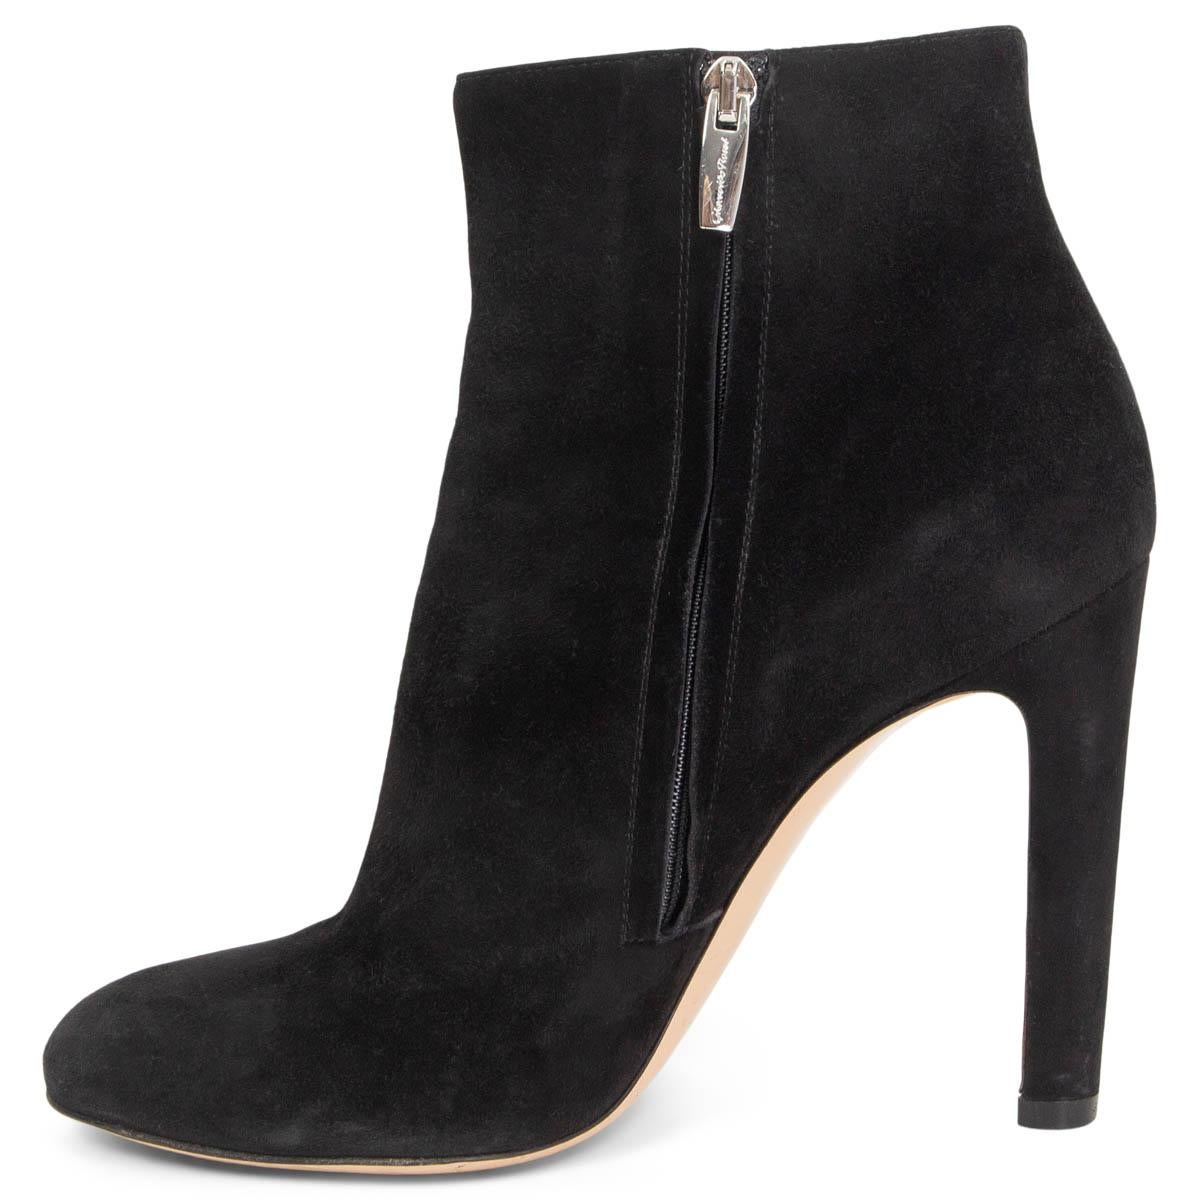 100% authentic Gianvito Rossi round-toe ankle booties in black suede. Open with a zipper on the inside. Have been worn with some soft press marks on the heel. Overall in very good condition. 

Measurements
Imprinted Size	39.5
Shoe Size	39.5
Inside